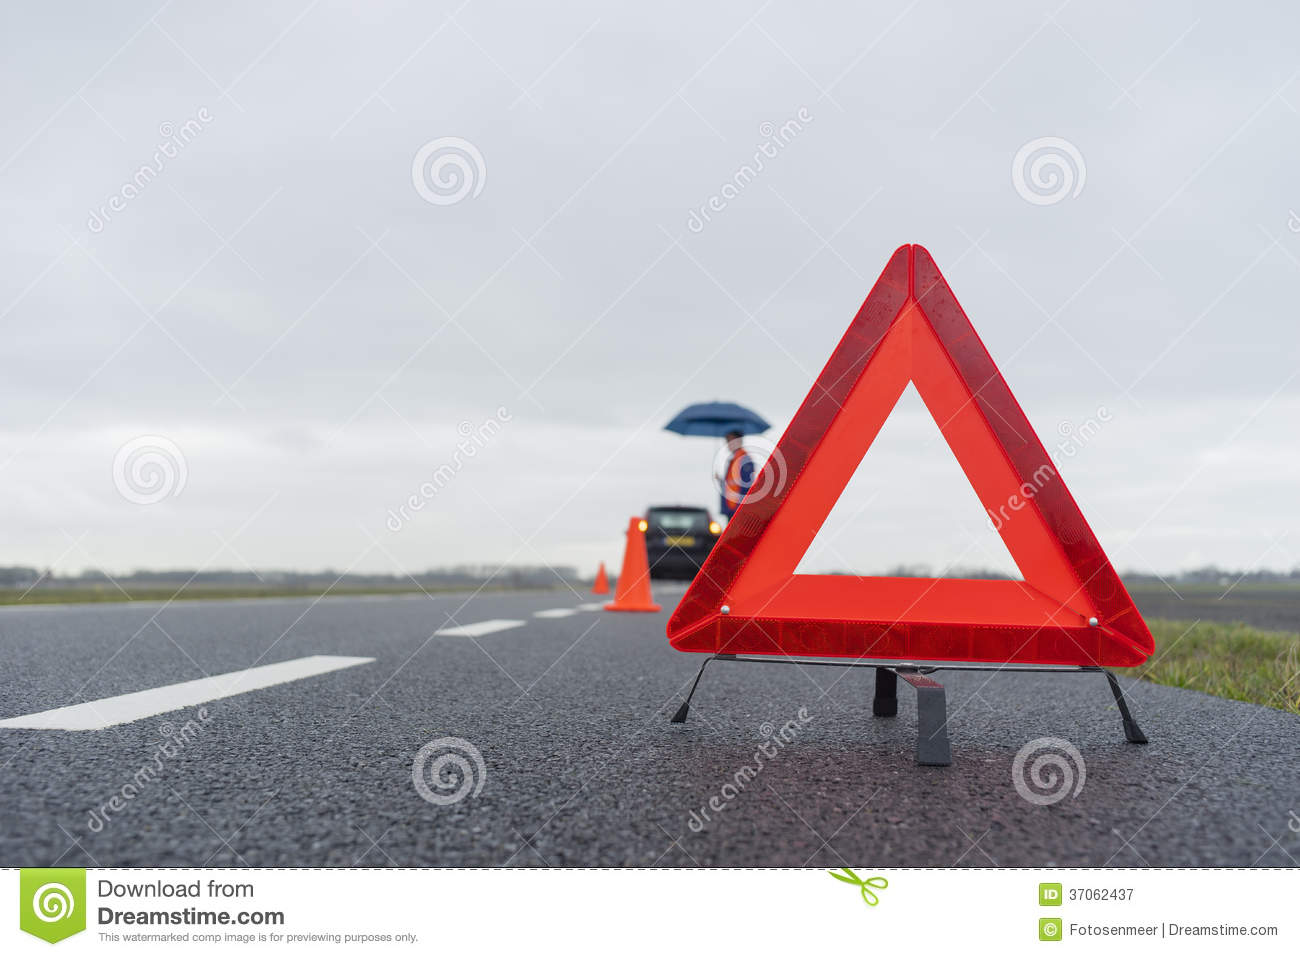 Man With An Umbrella Besides His Broken Car Alongside A Road In The